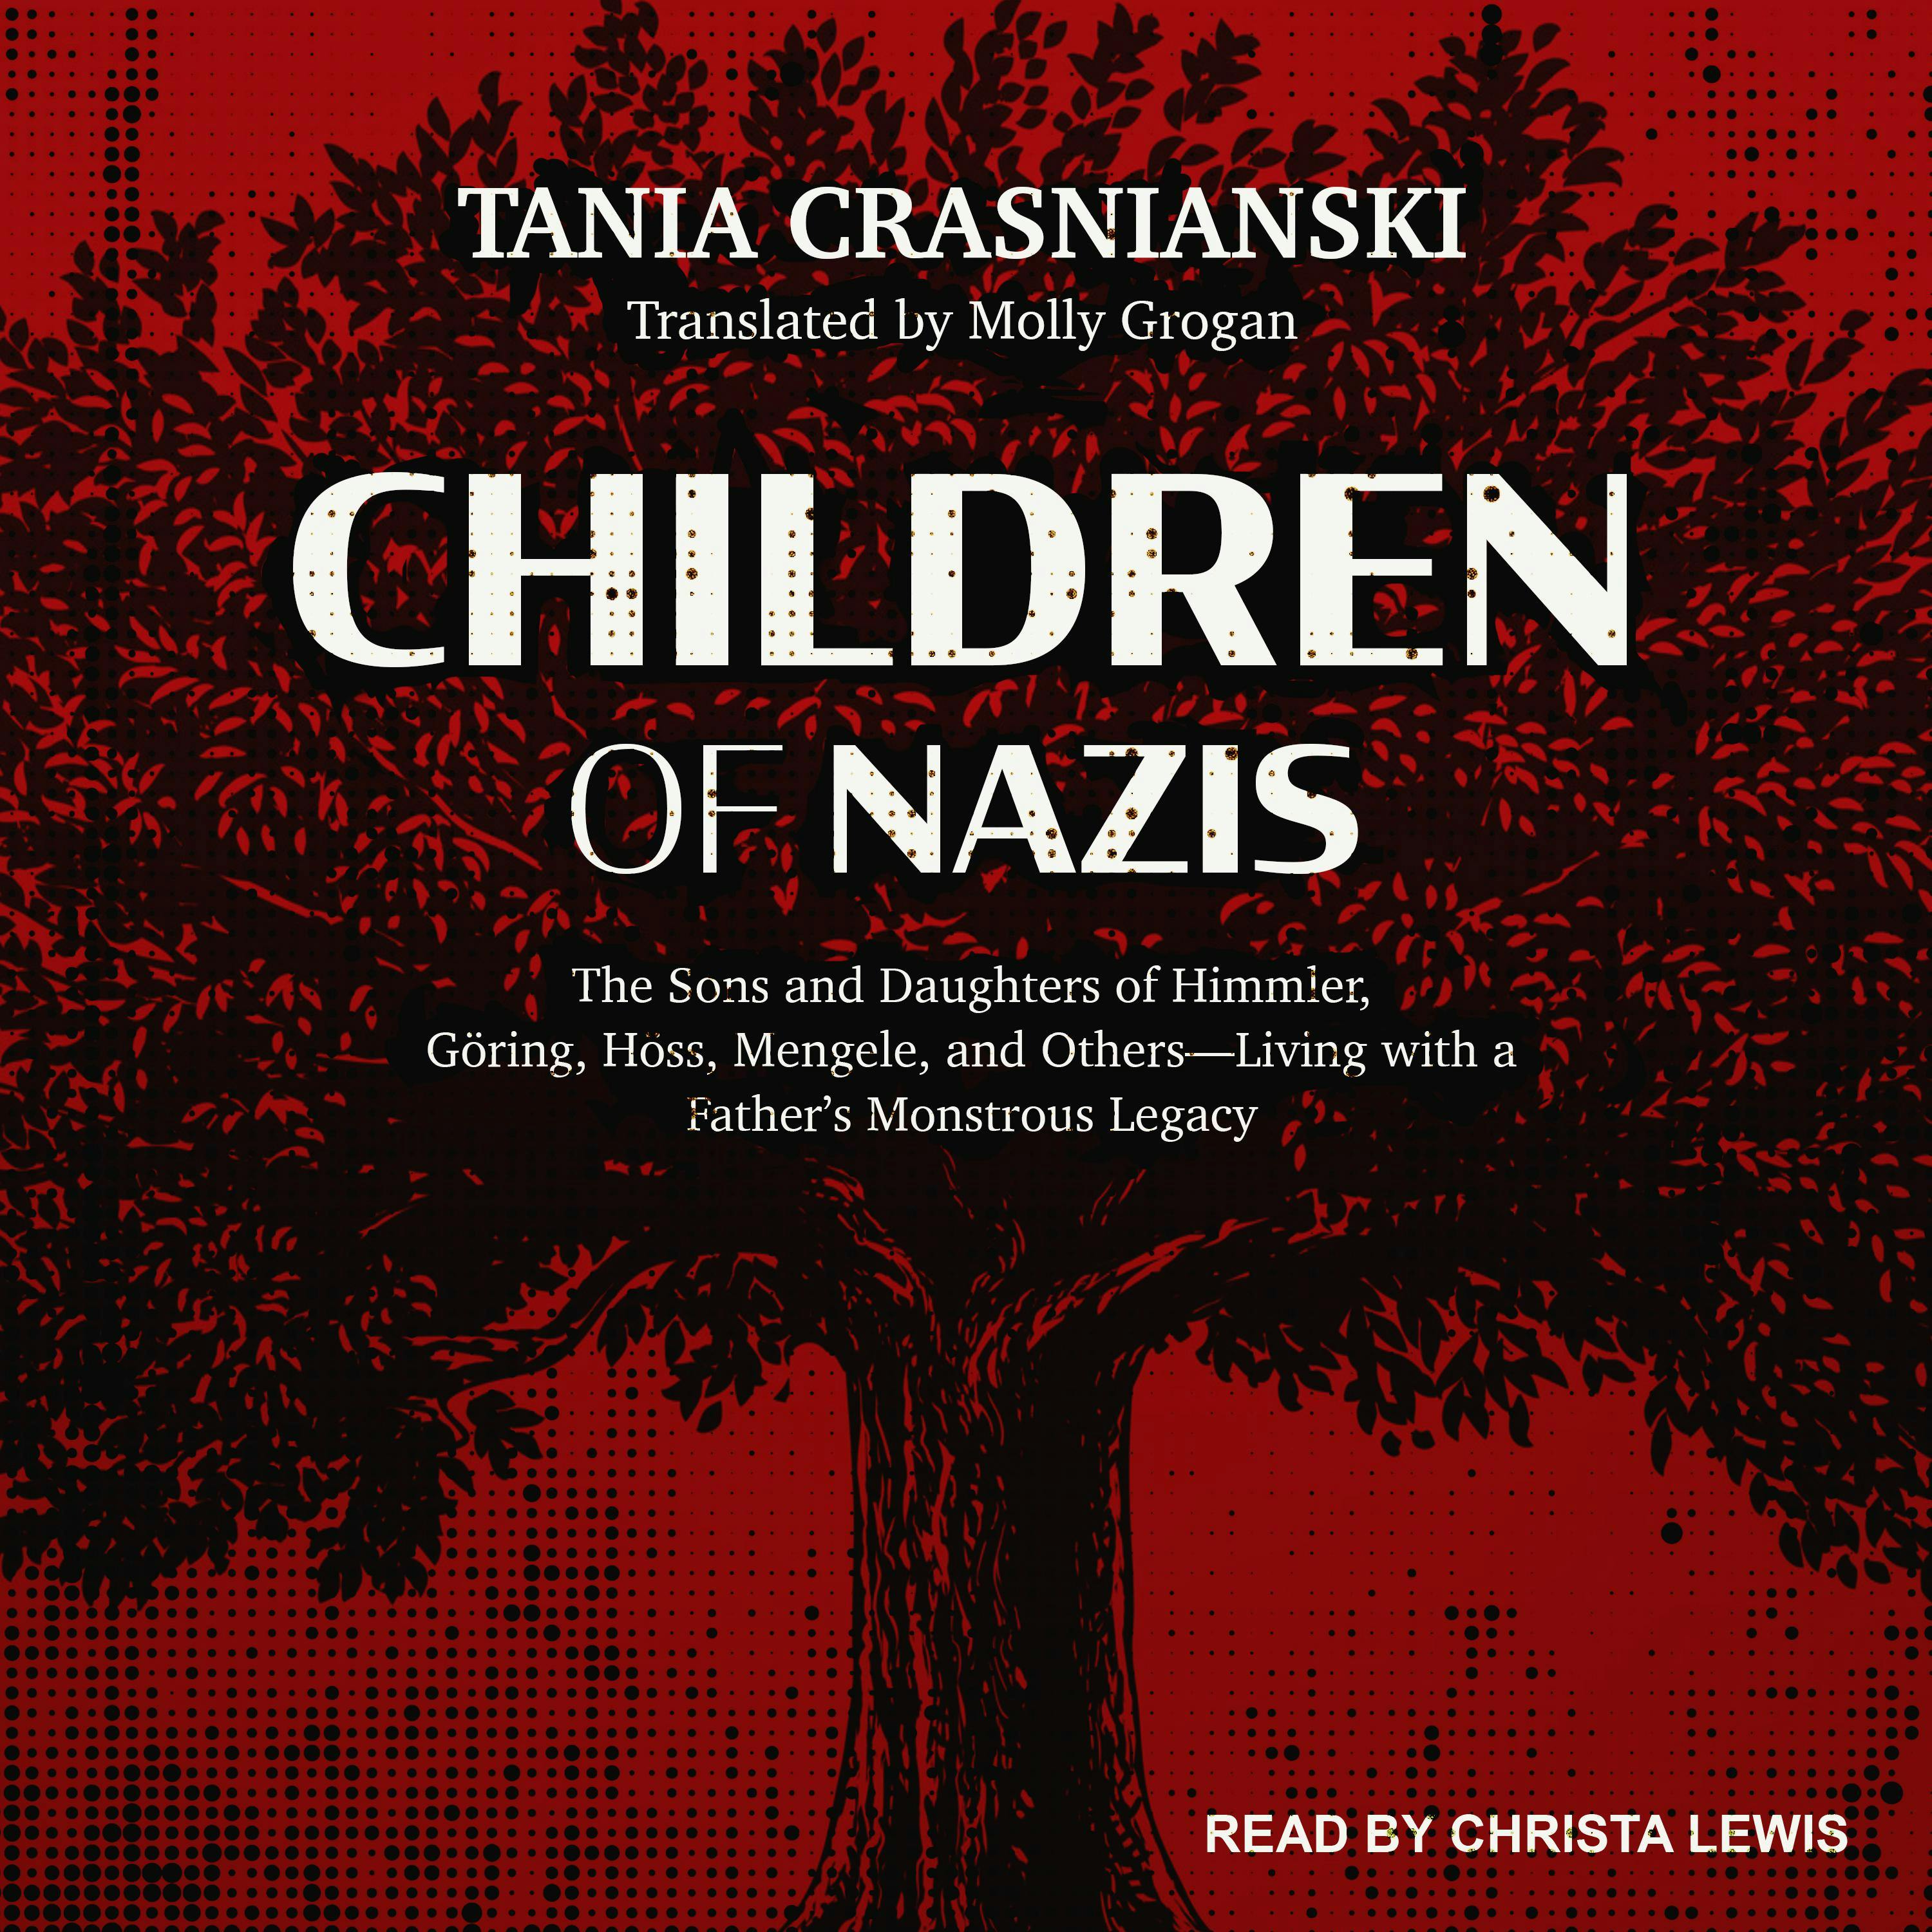 Children of Nazis: The Sons and Daughters of Himmler, Göring, Höss, Mengele, and Others-Living with a Father’s Monstrous Legacy - Tania Crasnianski